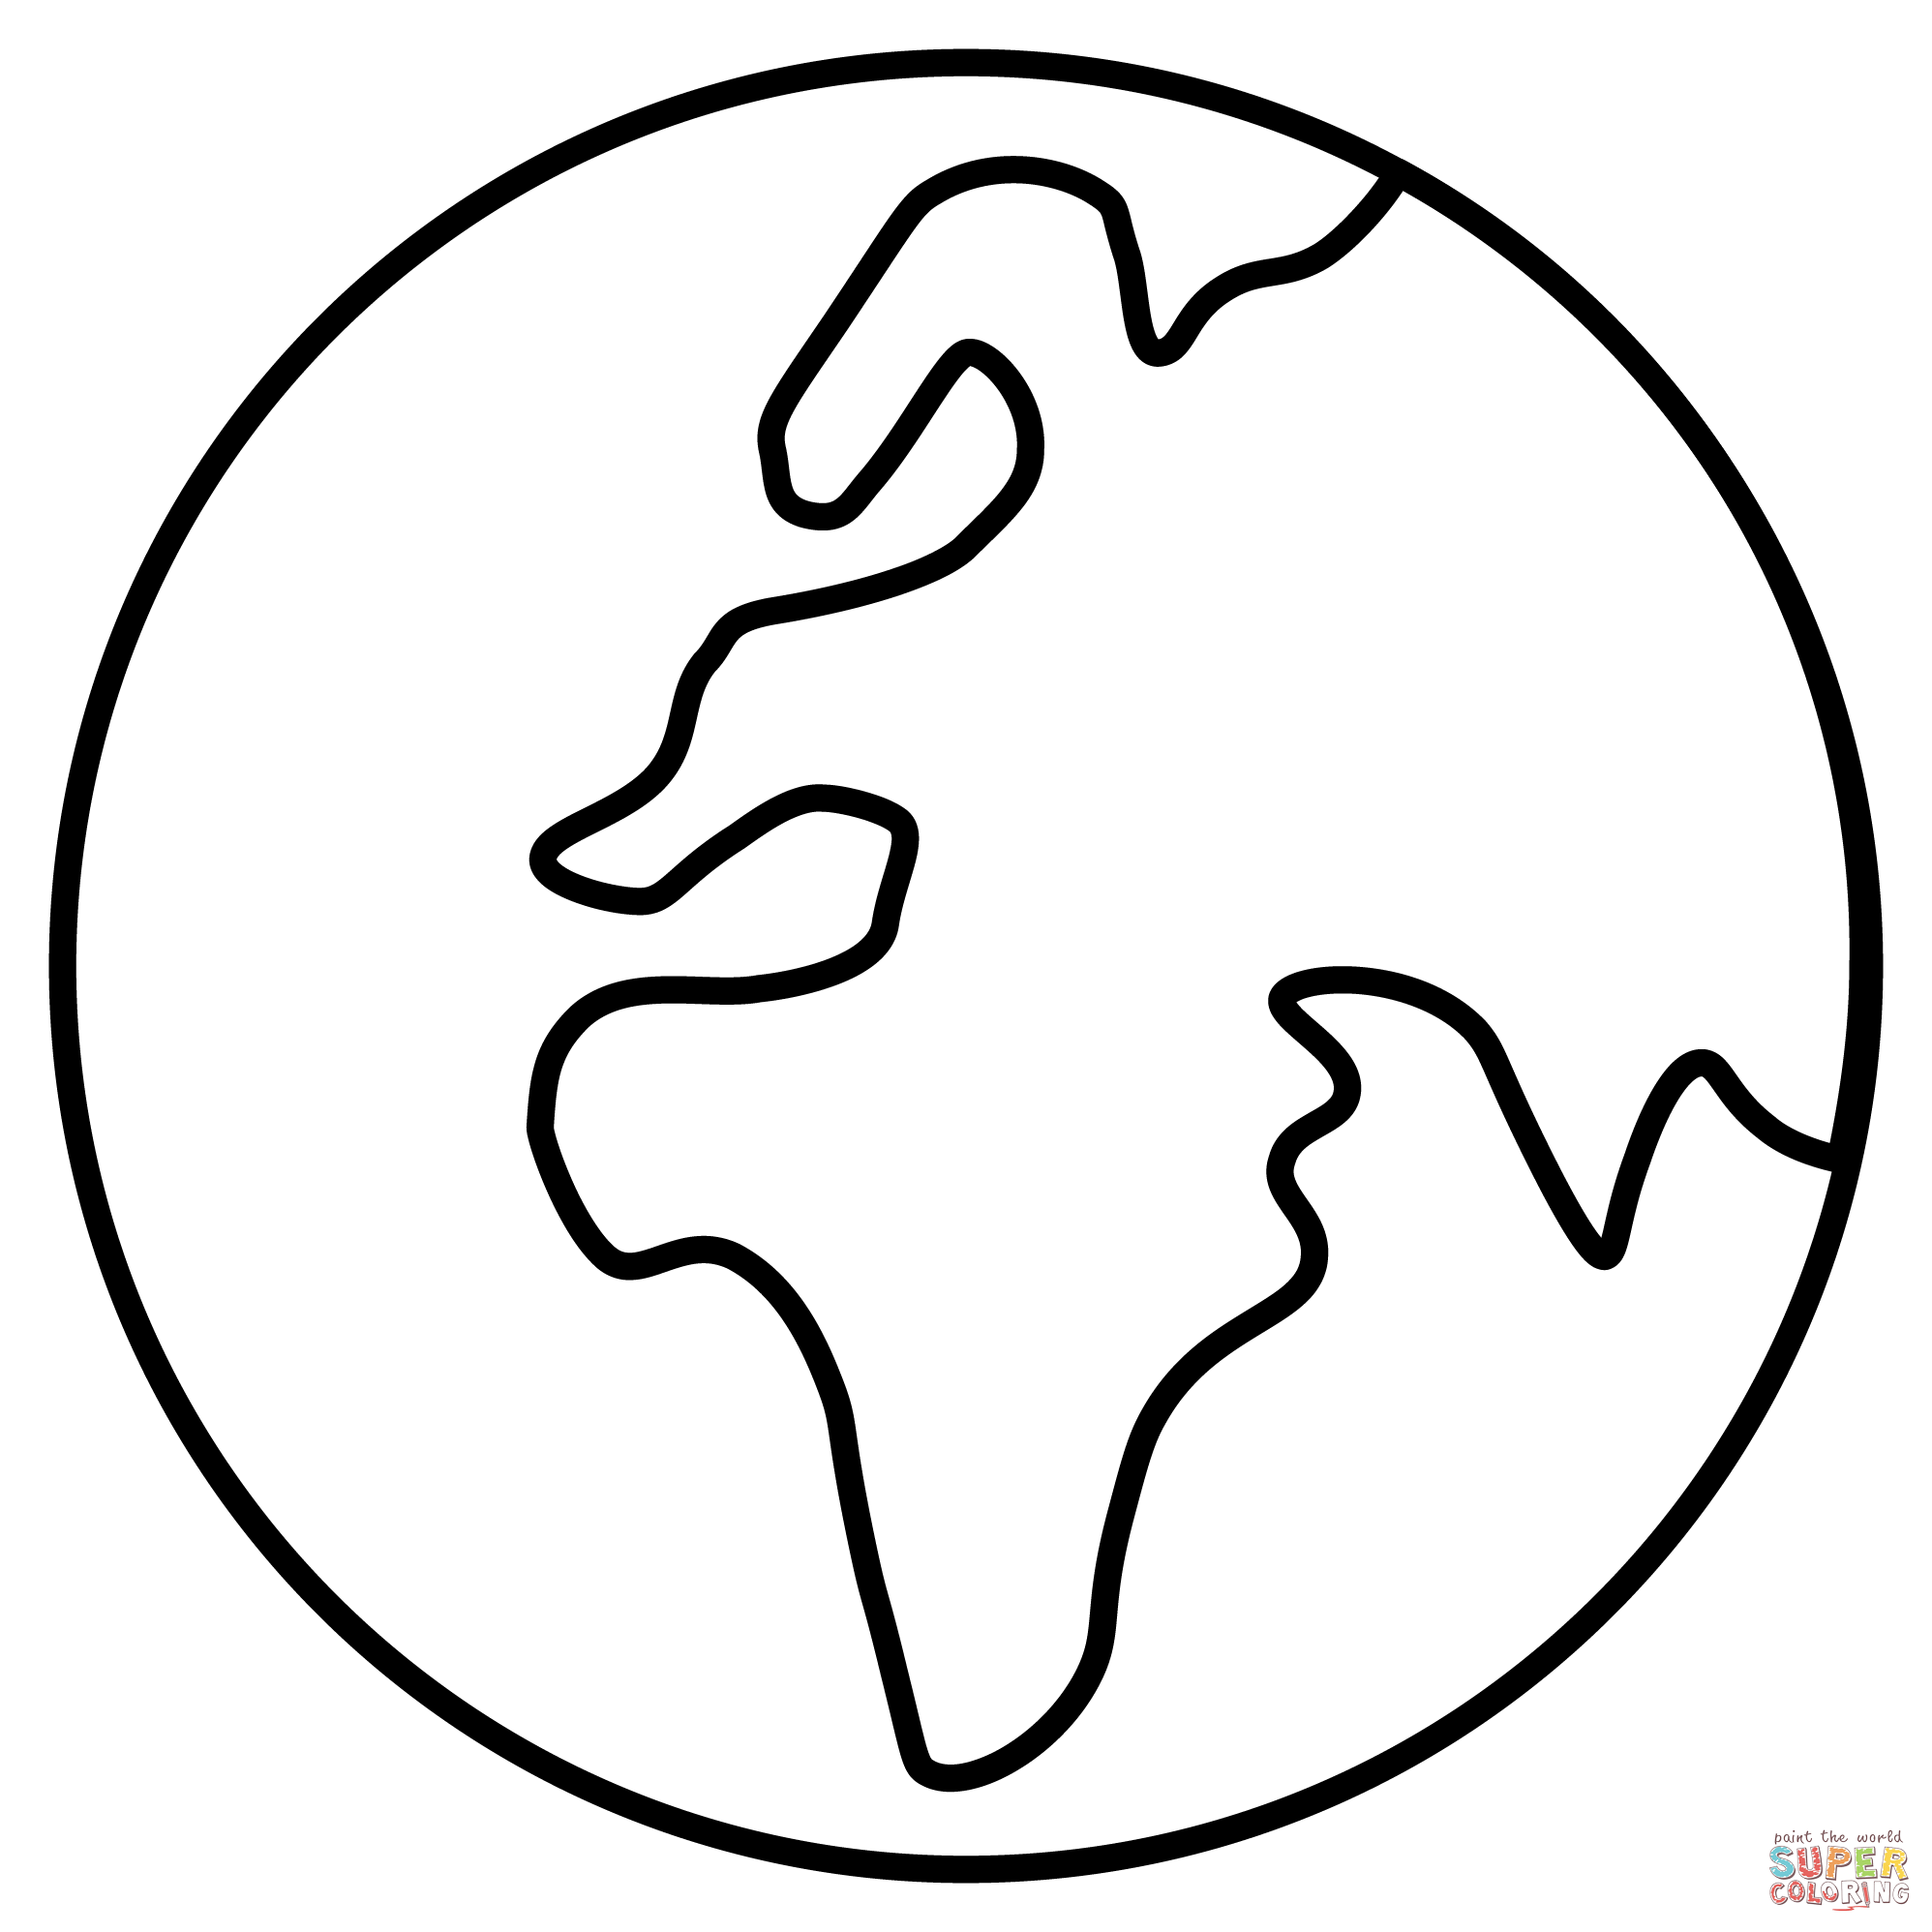 Globe showing europe africa emoji coloring page free printable coloring pages